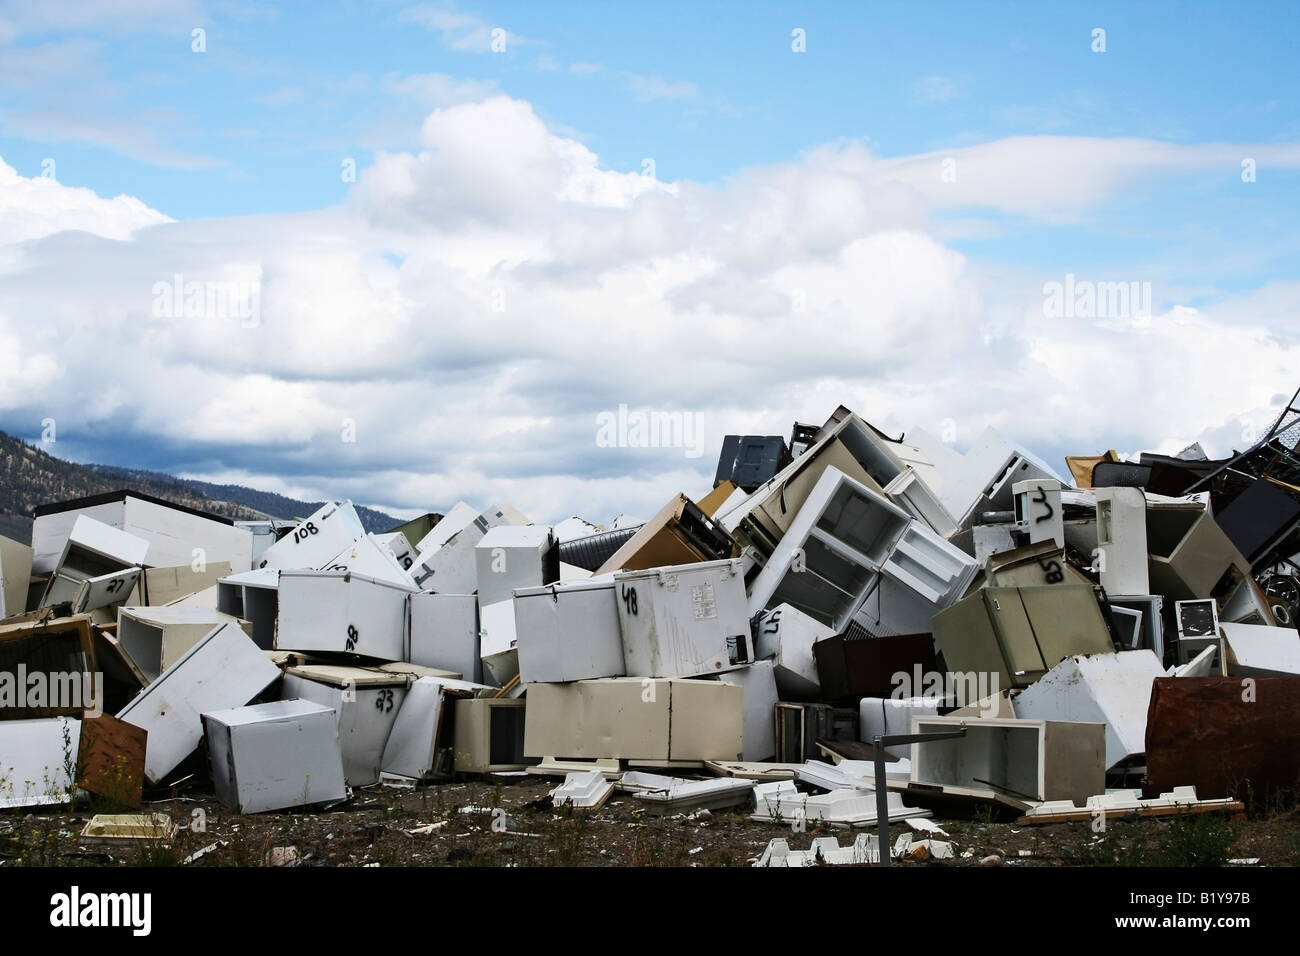 Pile of refrigerators and freezers along with other metal for recycling Stock Photo